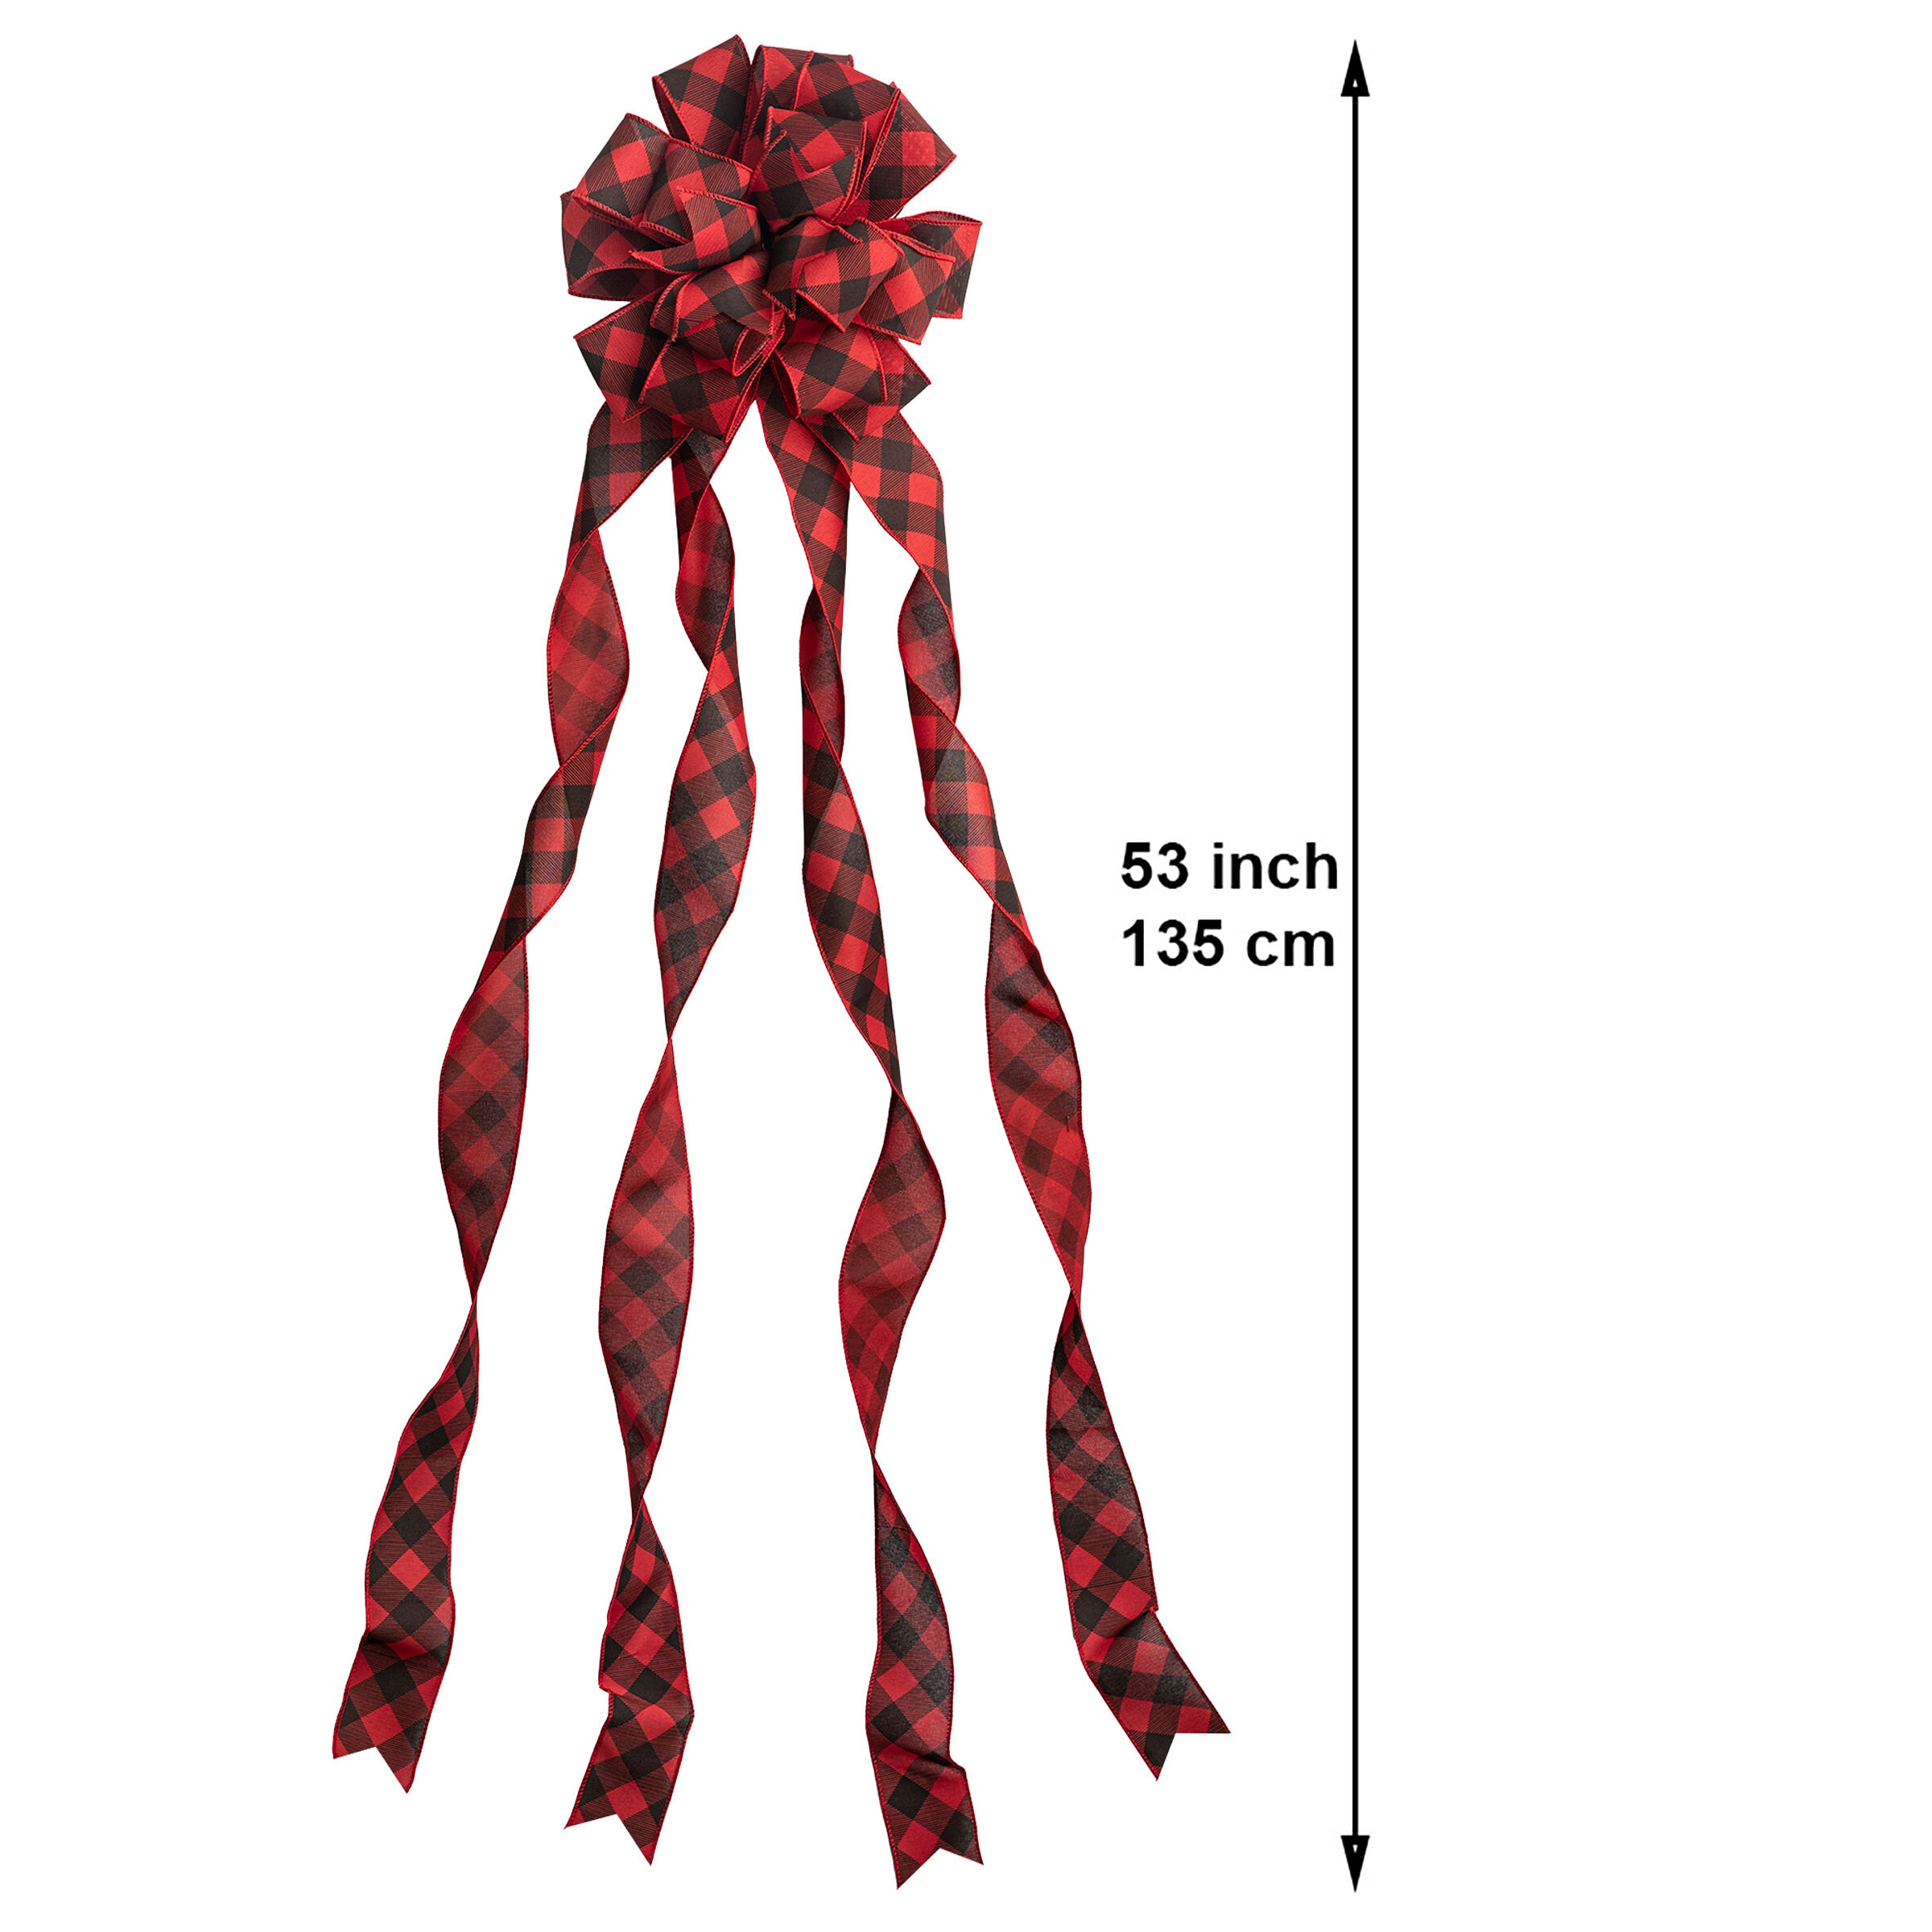 Large Red Satin Christmas Tree Topper Bow 6 Ft. Tails 